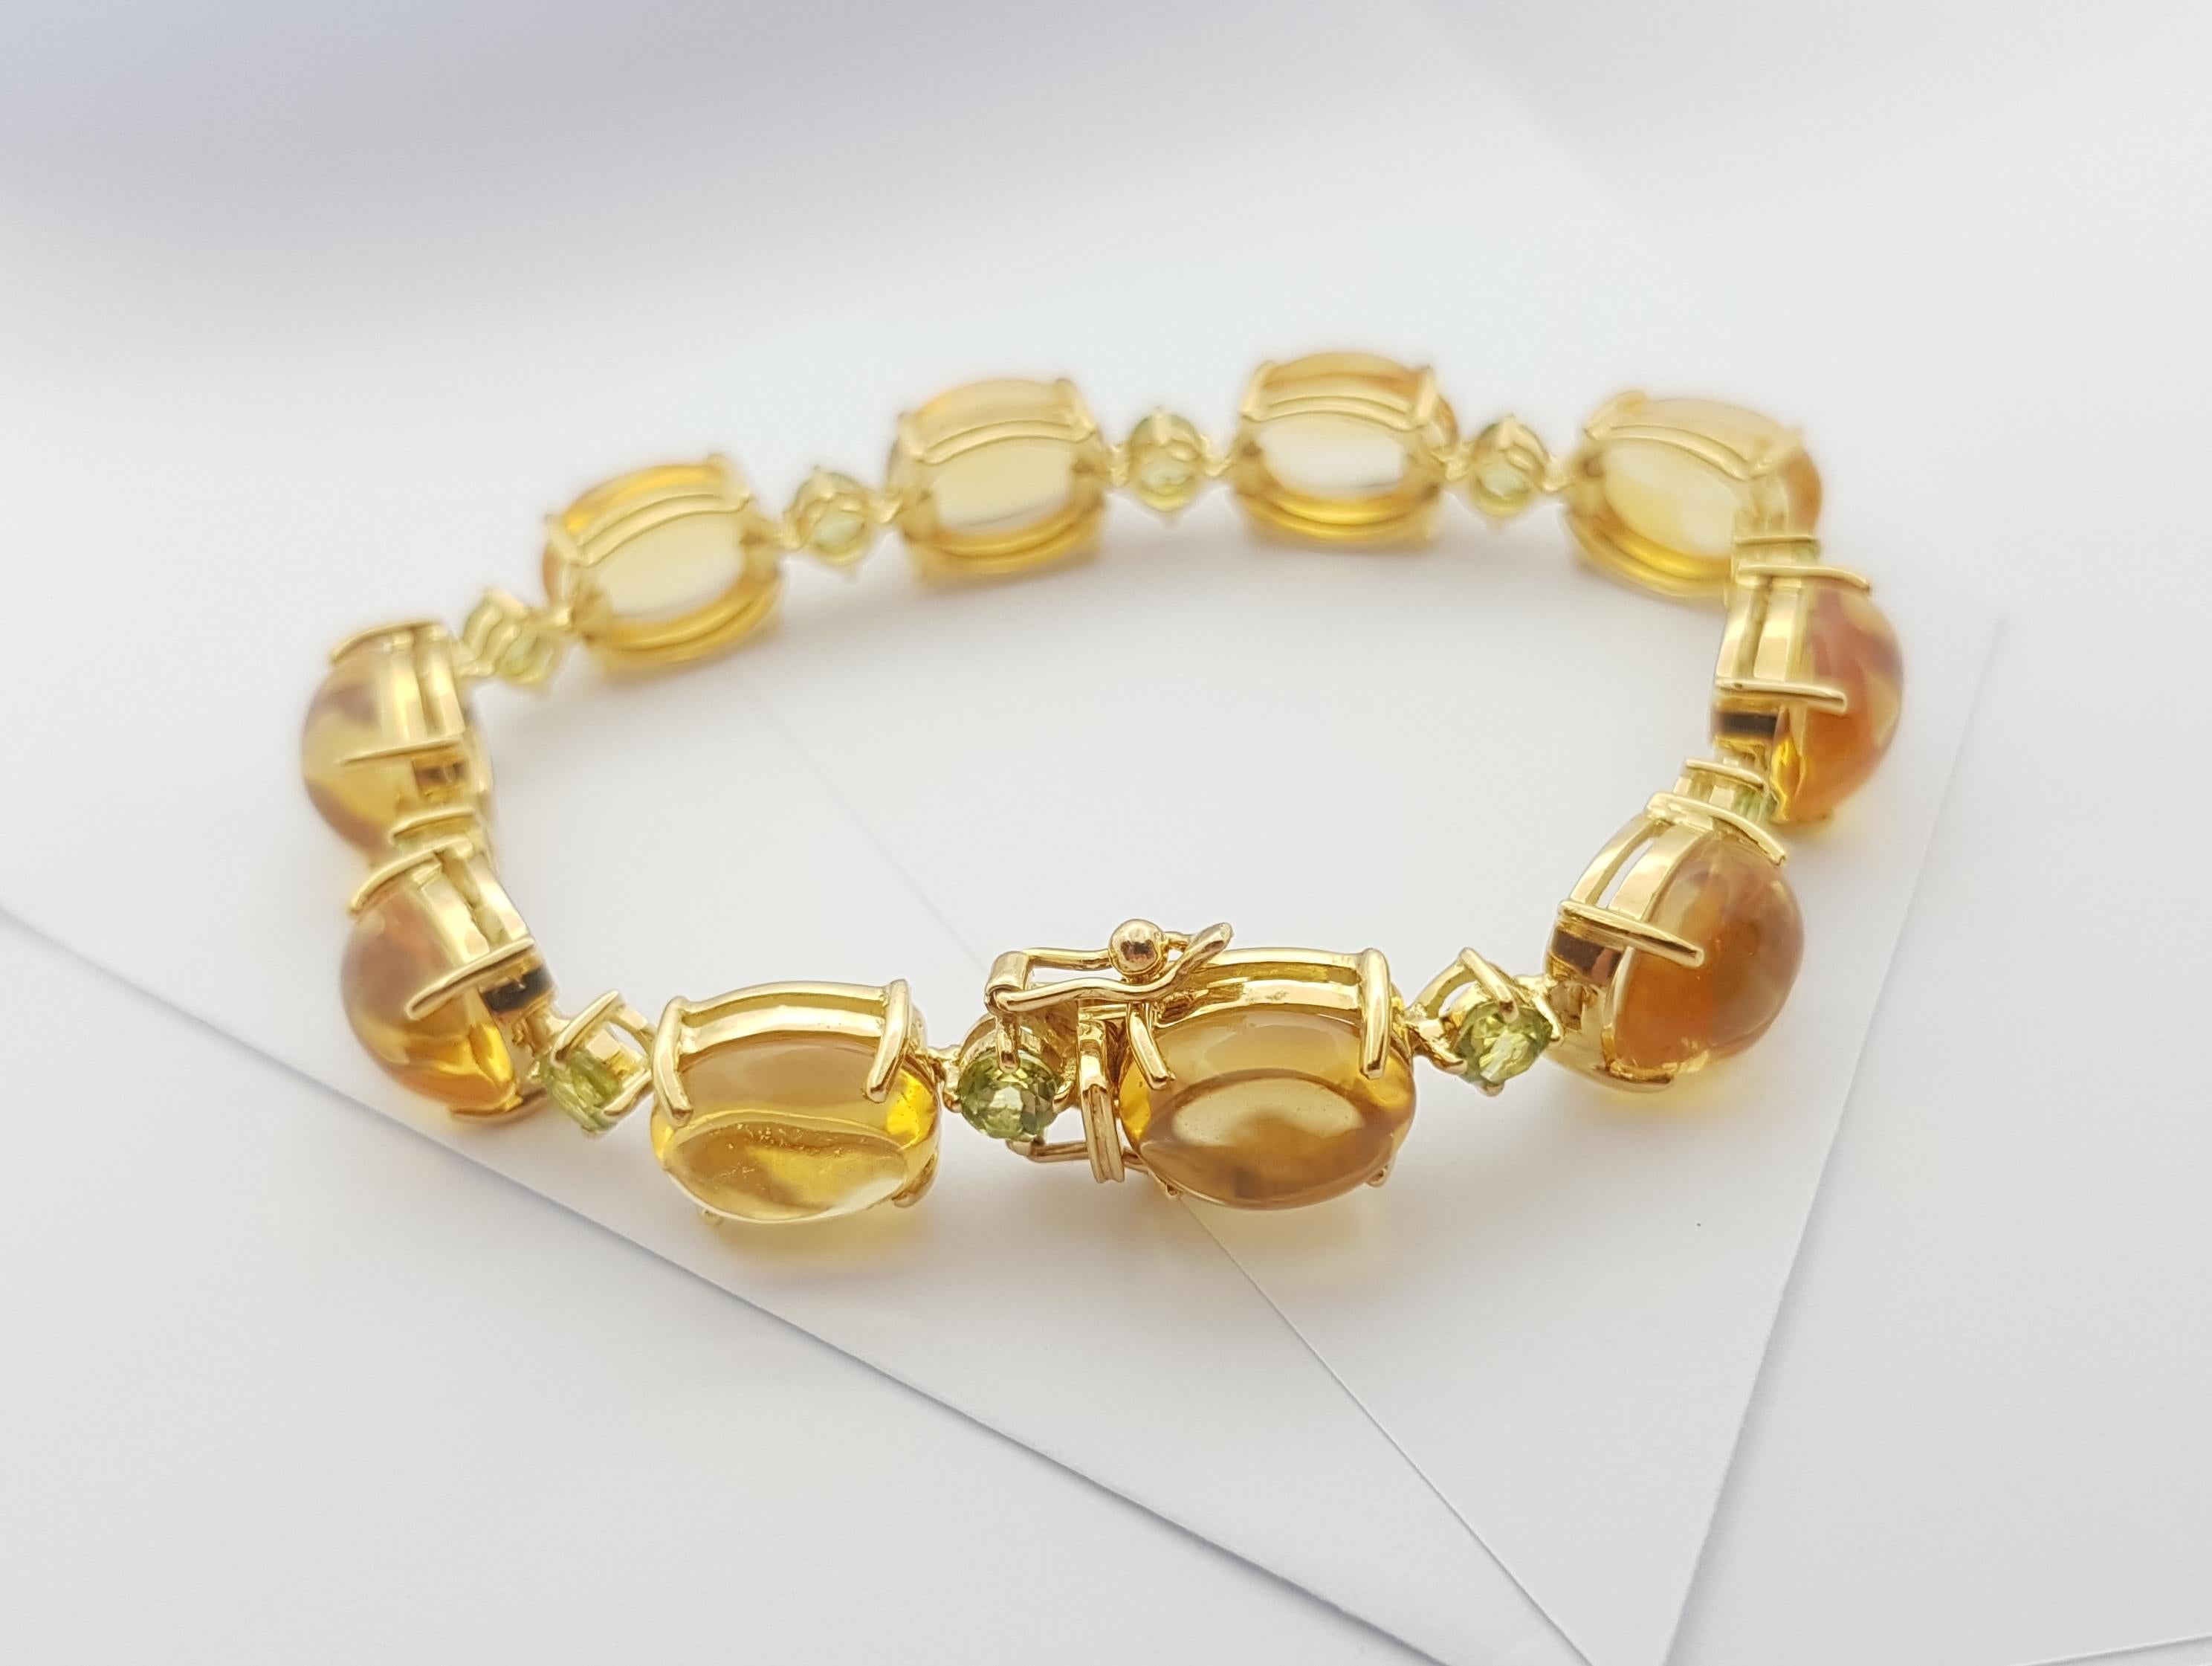 Cabochon Citrine with Peridot Bracelet set in 18 Karat Gold Settings For Sale 4